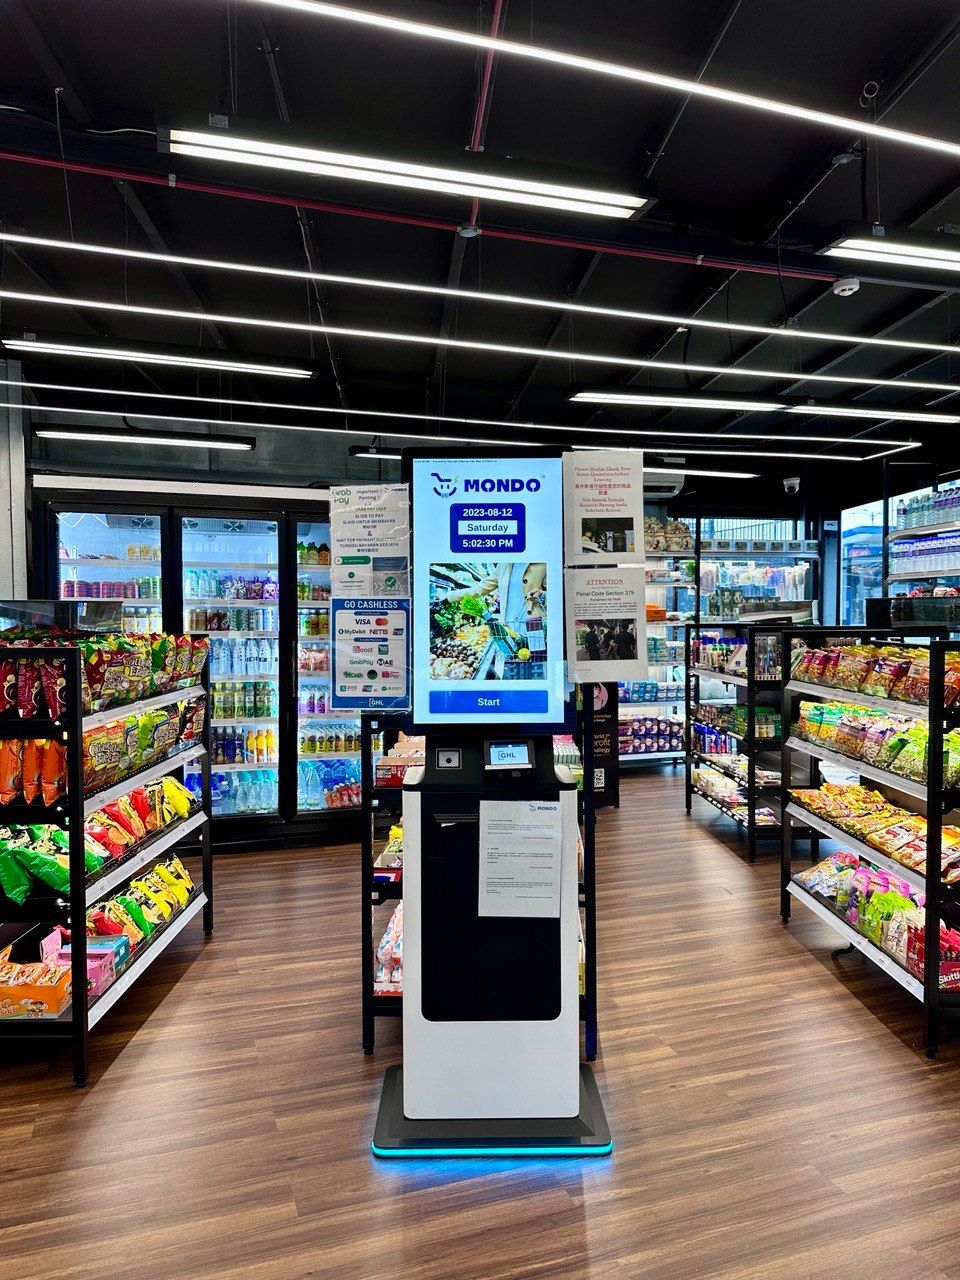 Mondo Smart Store Expands Its Reach: New Branch at MRT Ampang Park Station